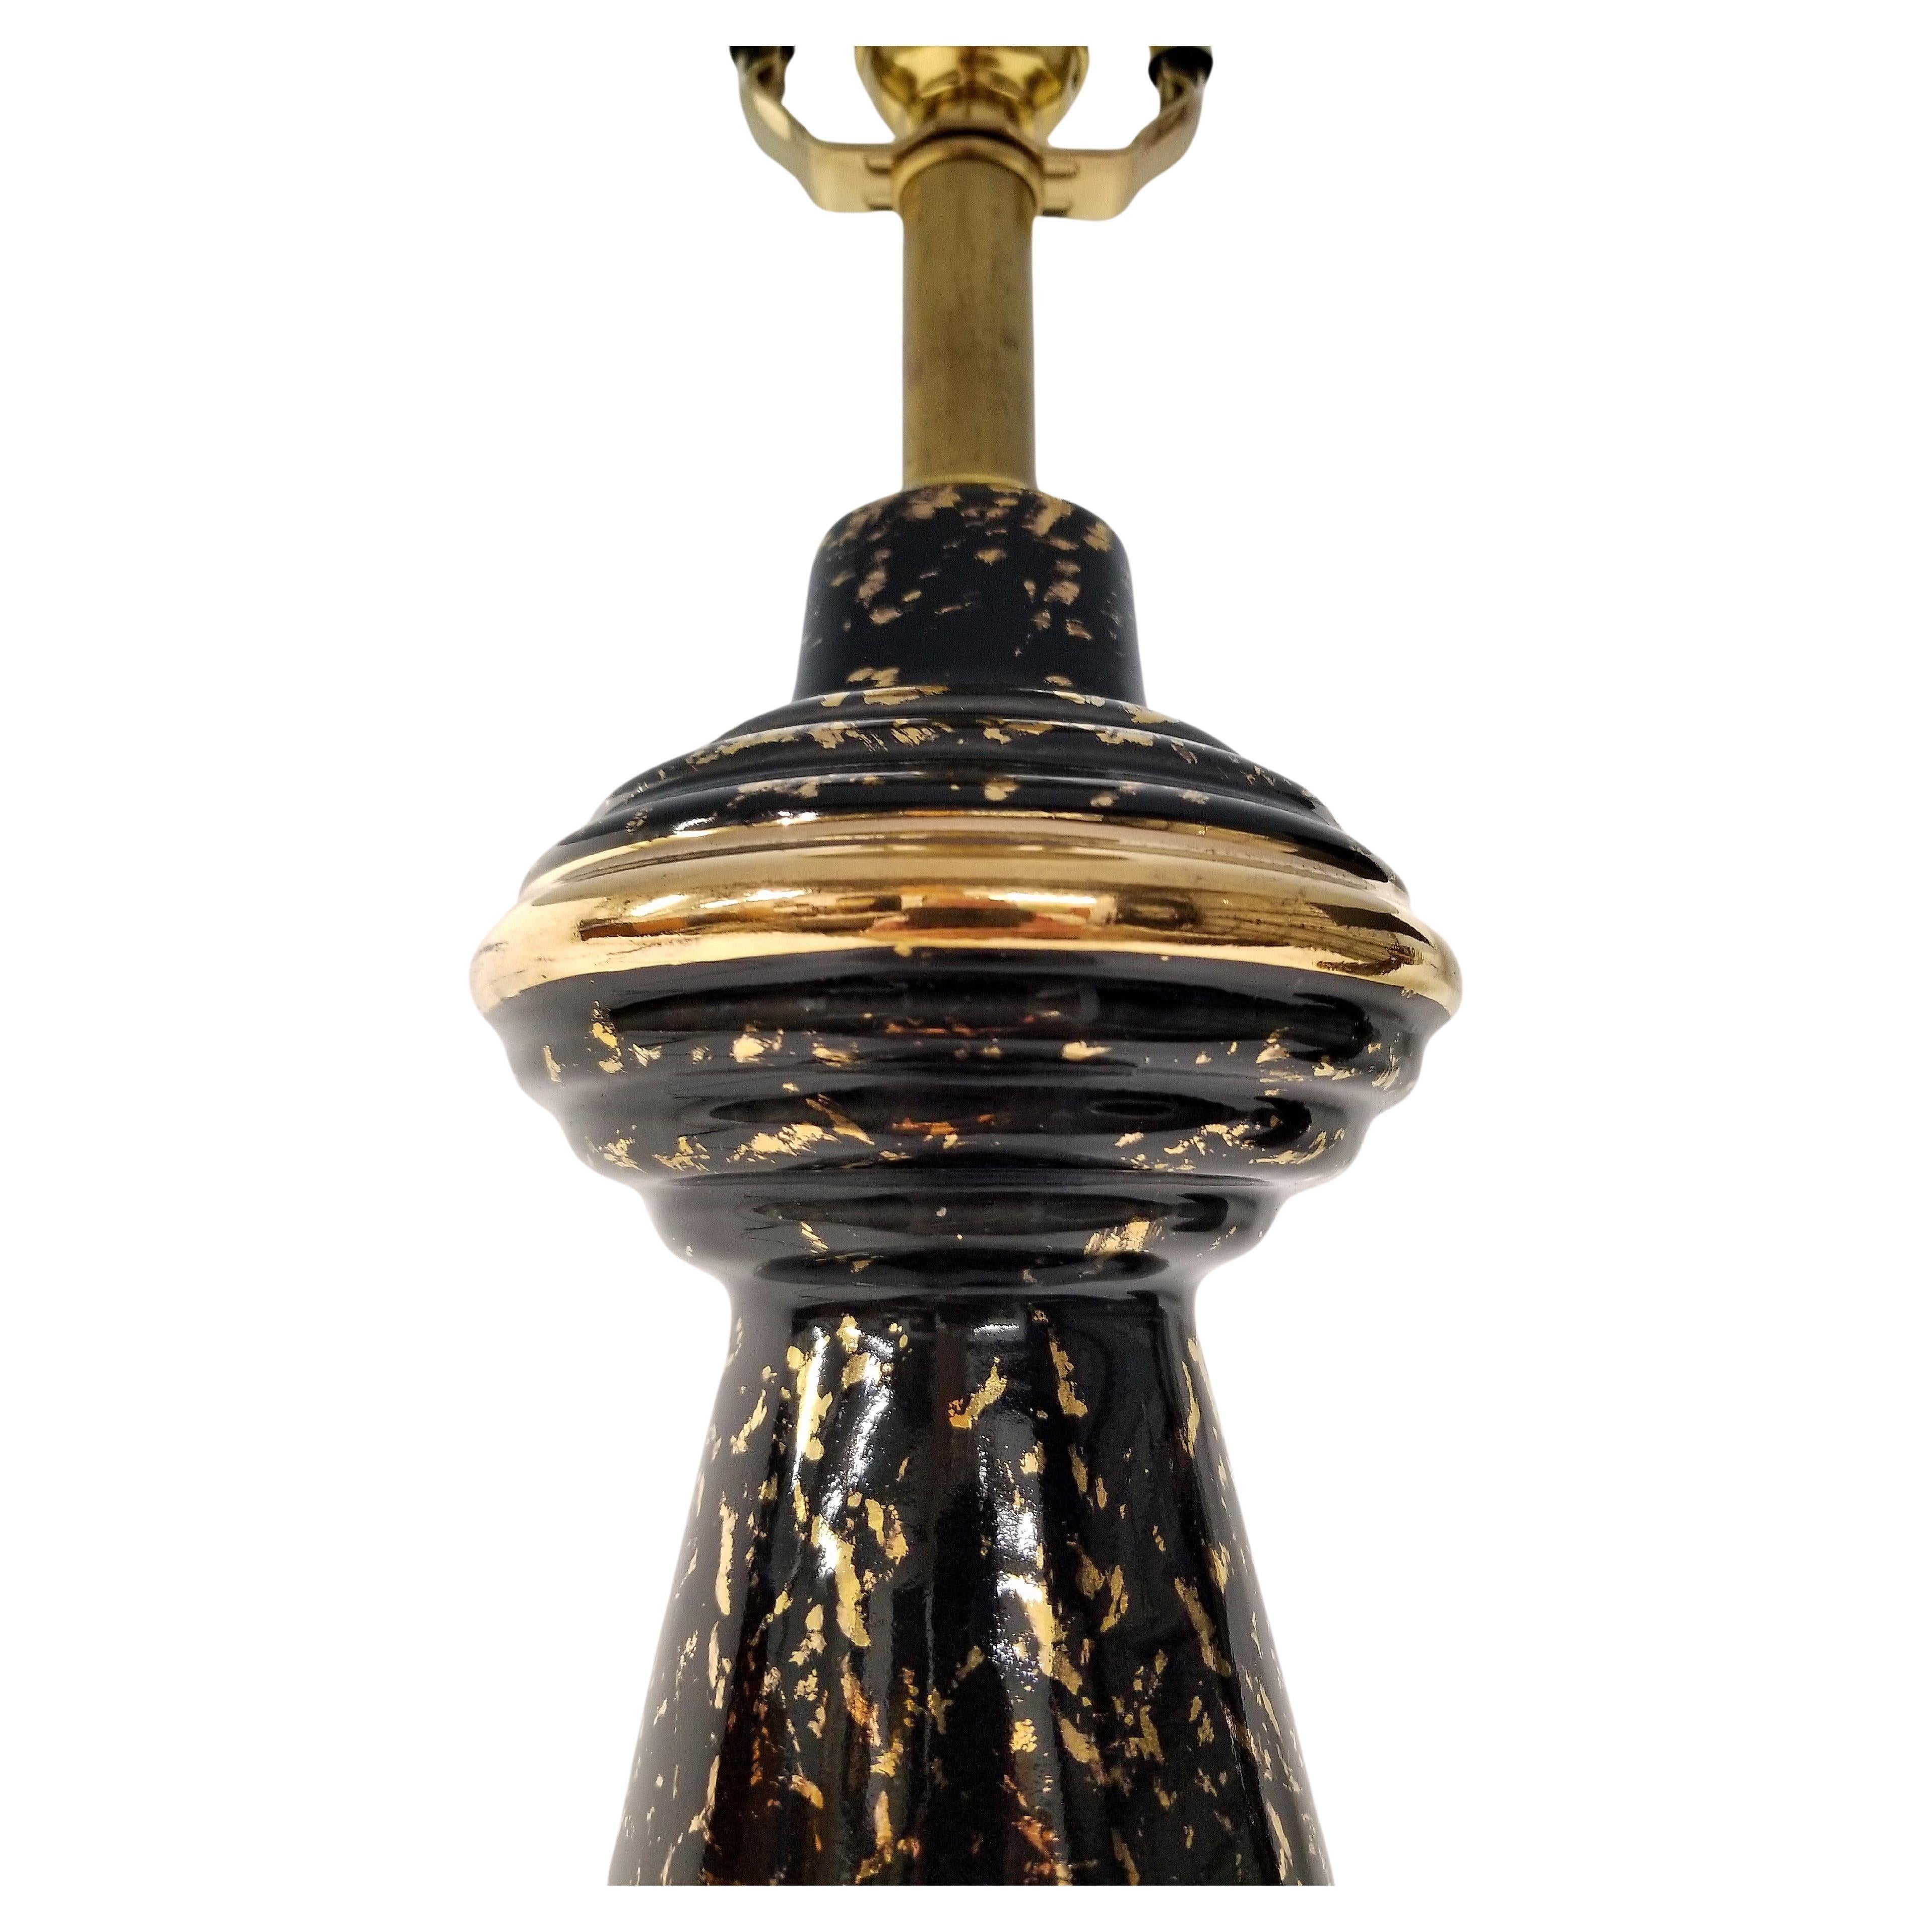 Art Deco Black and Gold Table Lamps with New Custom Shades - a Pair In Excellent Condition For Sale In Miami, FL